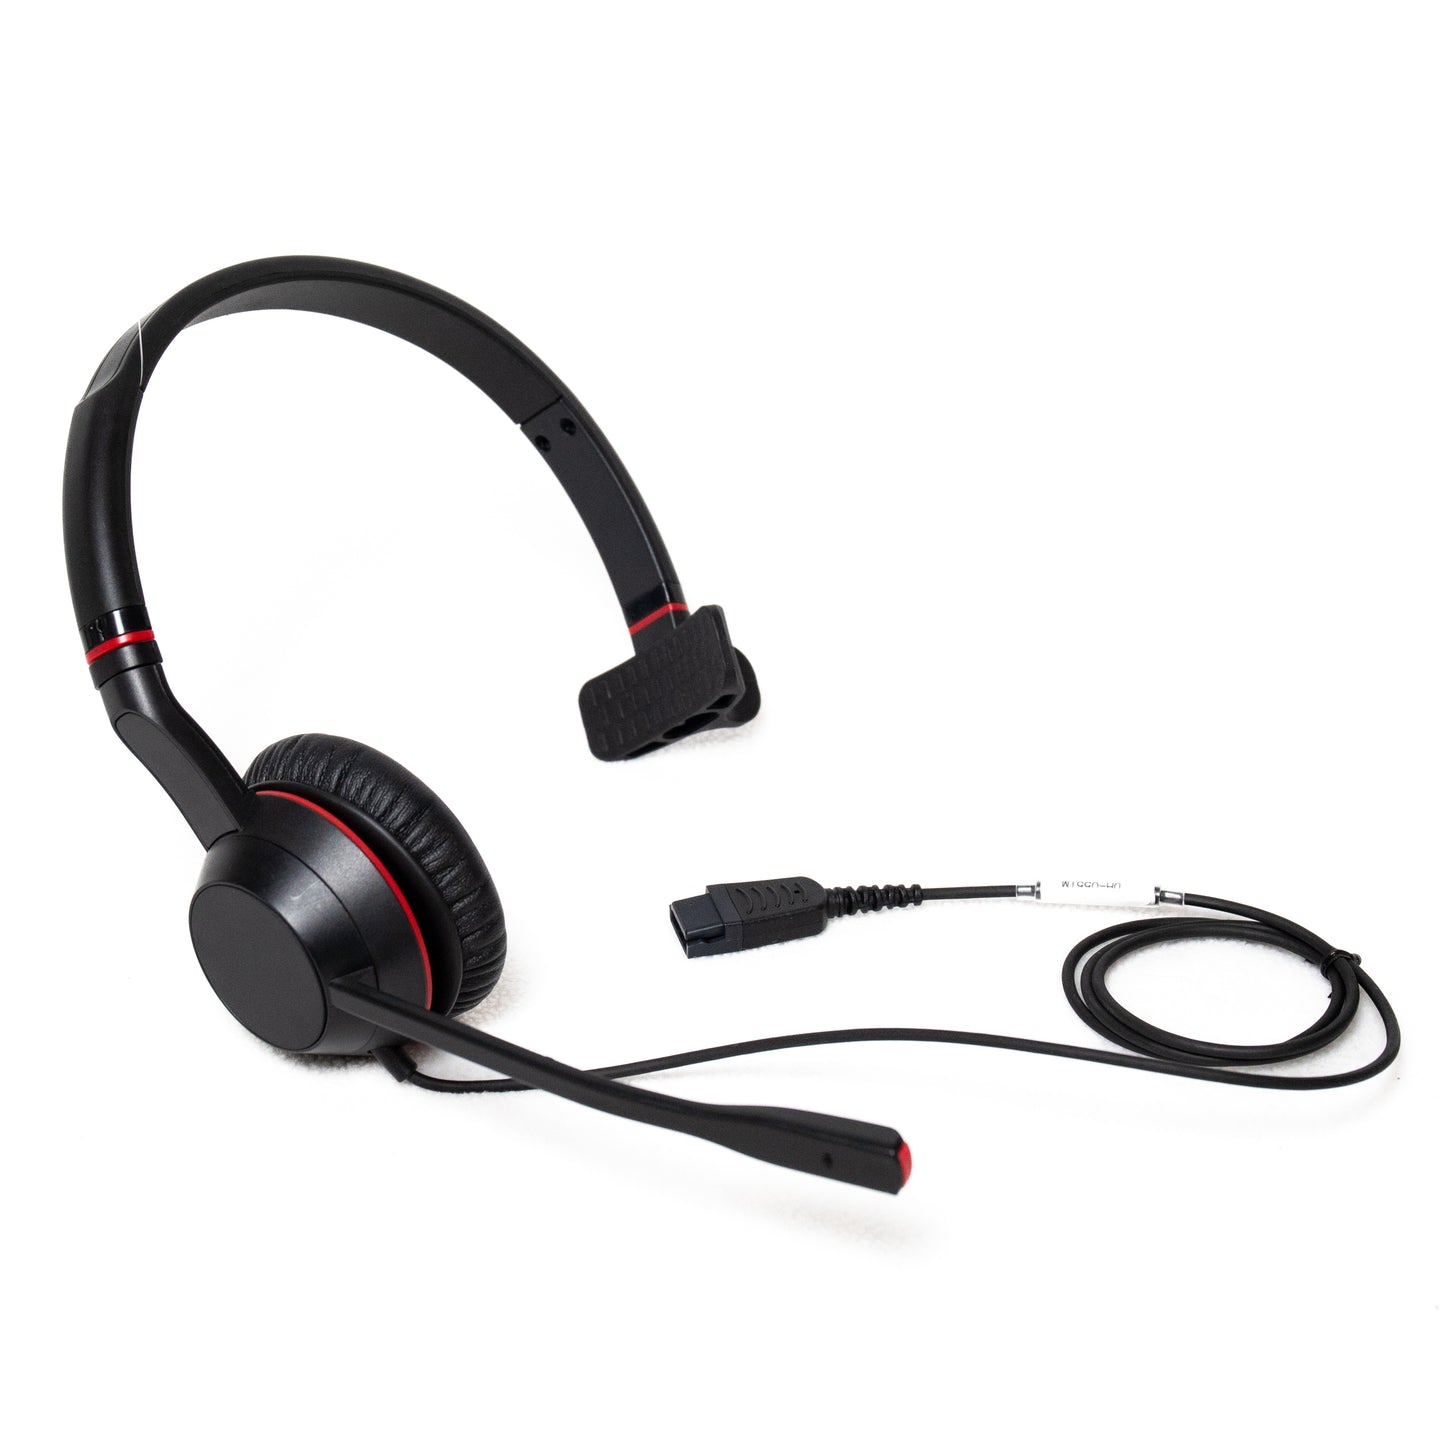 Starkey S700-NC Headset with Passive Noise Canceling Mic (Cord sold separately.)